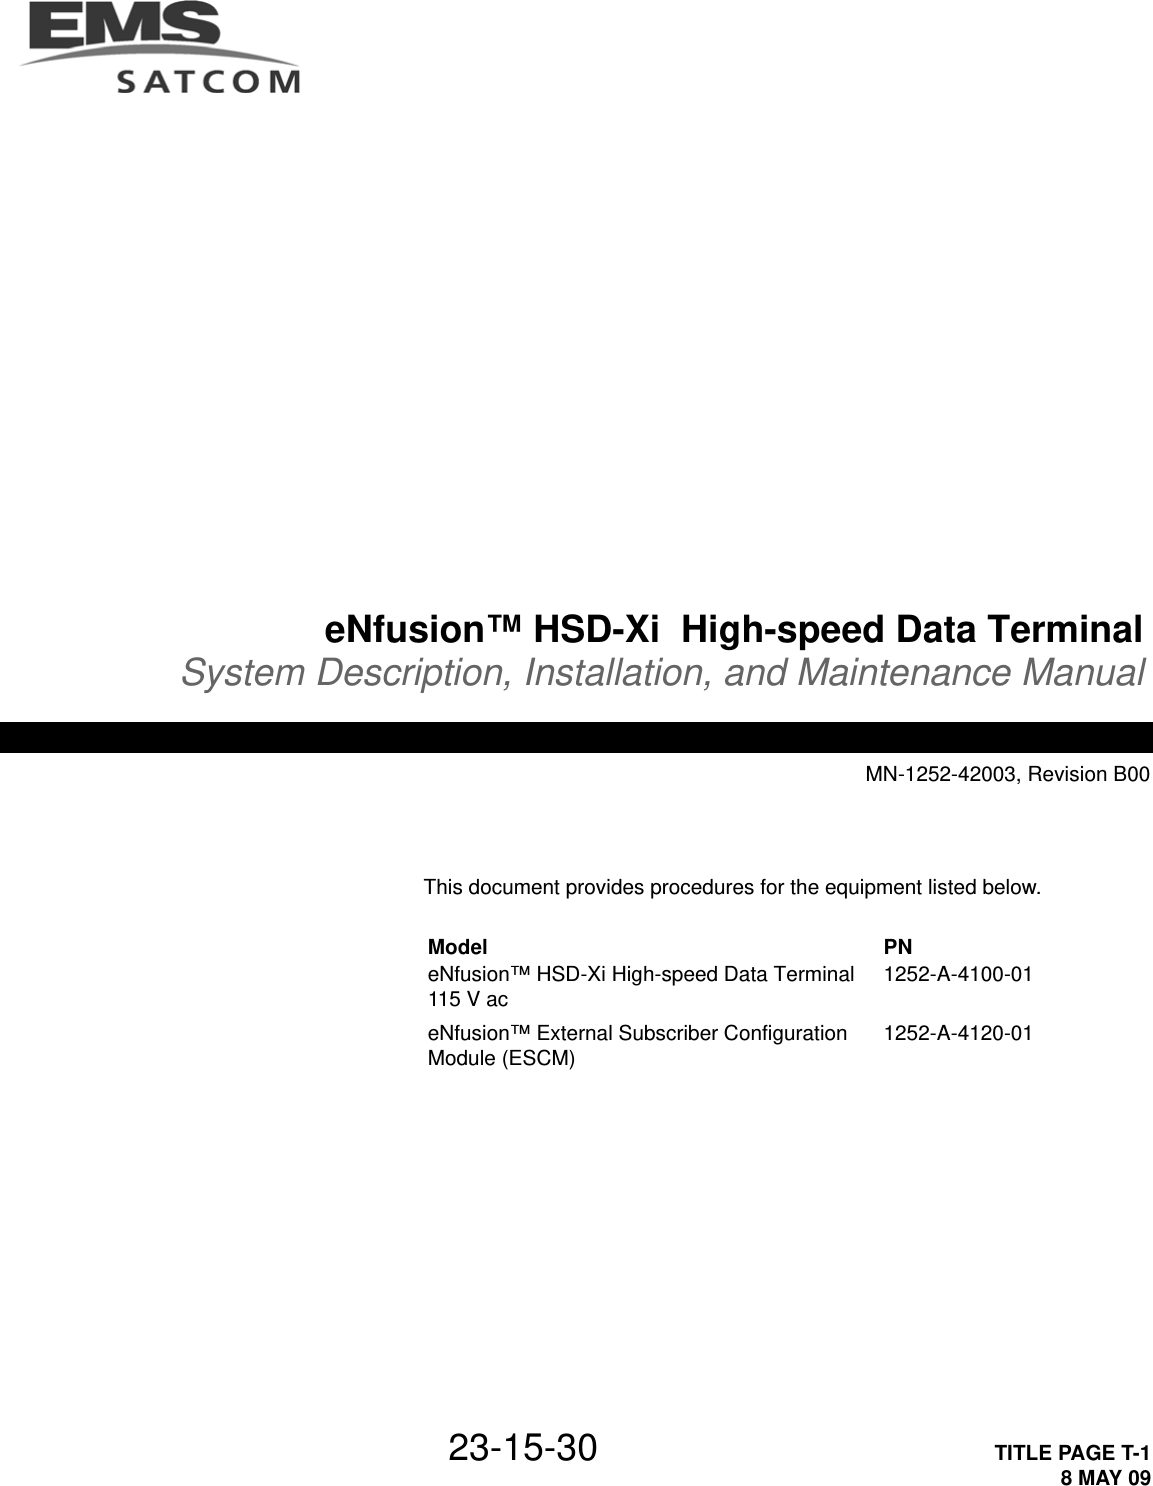 23-15-30 TITLE PAGE T-18 MAY 09eNfusion™ HSD-Xi  High-speed Data TerminalSystem Description, Installation, and Maintenance ManualMN-1252-42003, Revision B00This document provides procedures for the equipment listed below.Model PNeNfusion™ HSD-Xi High-speed Data Terminal 115 V ac 1252-A-4100-01eNfusion™ External Subscriber Configuration Module (ESCM) 1252-A-4120-01